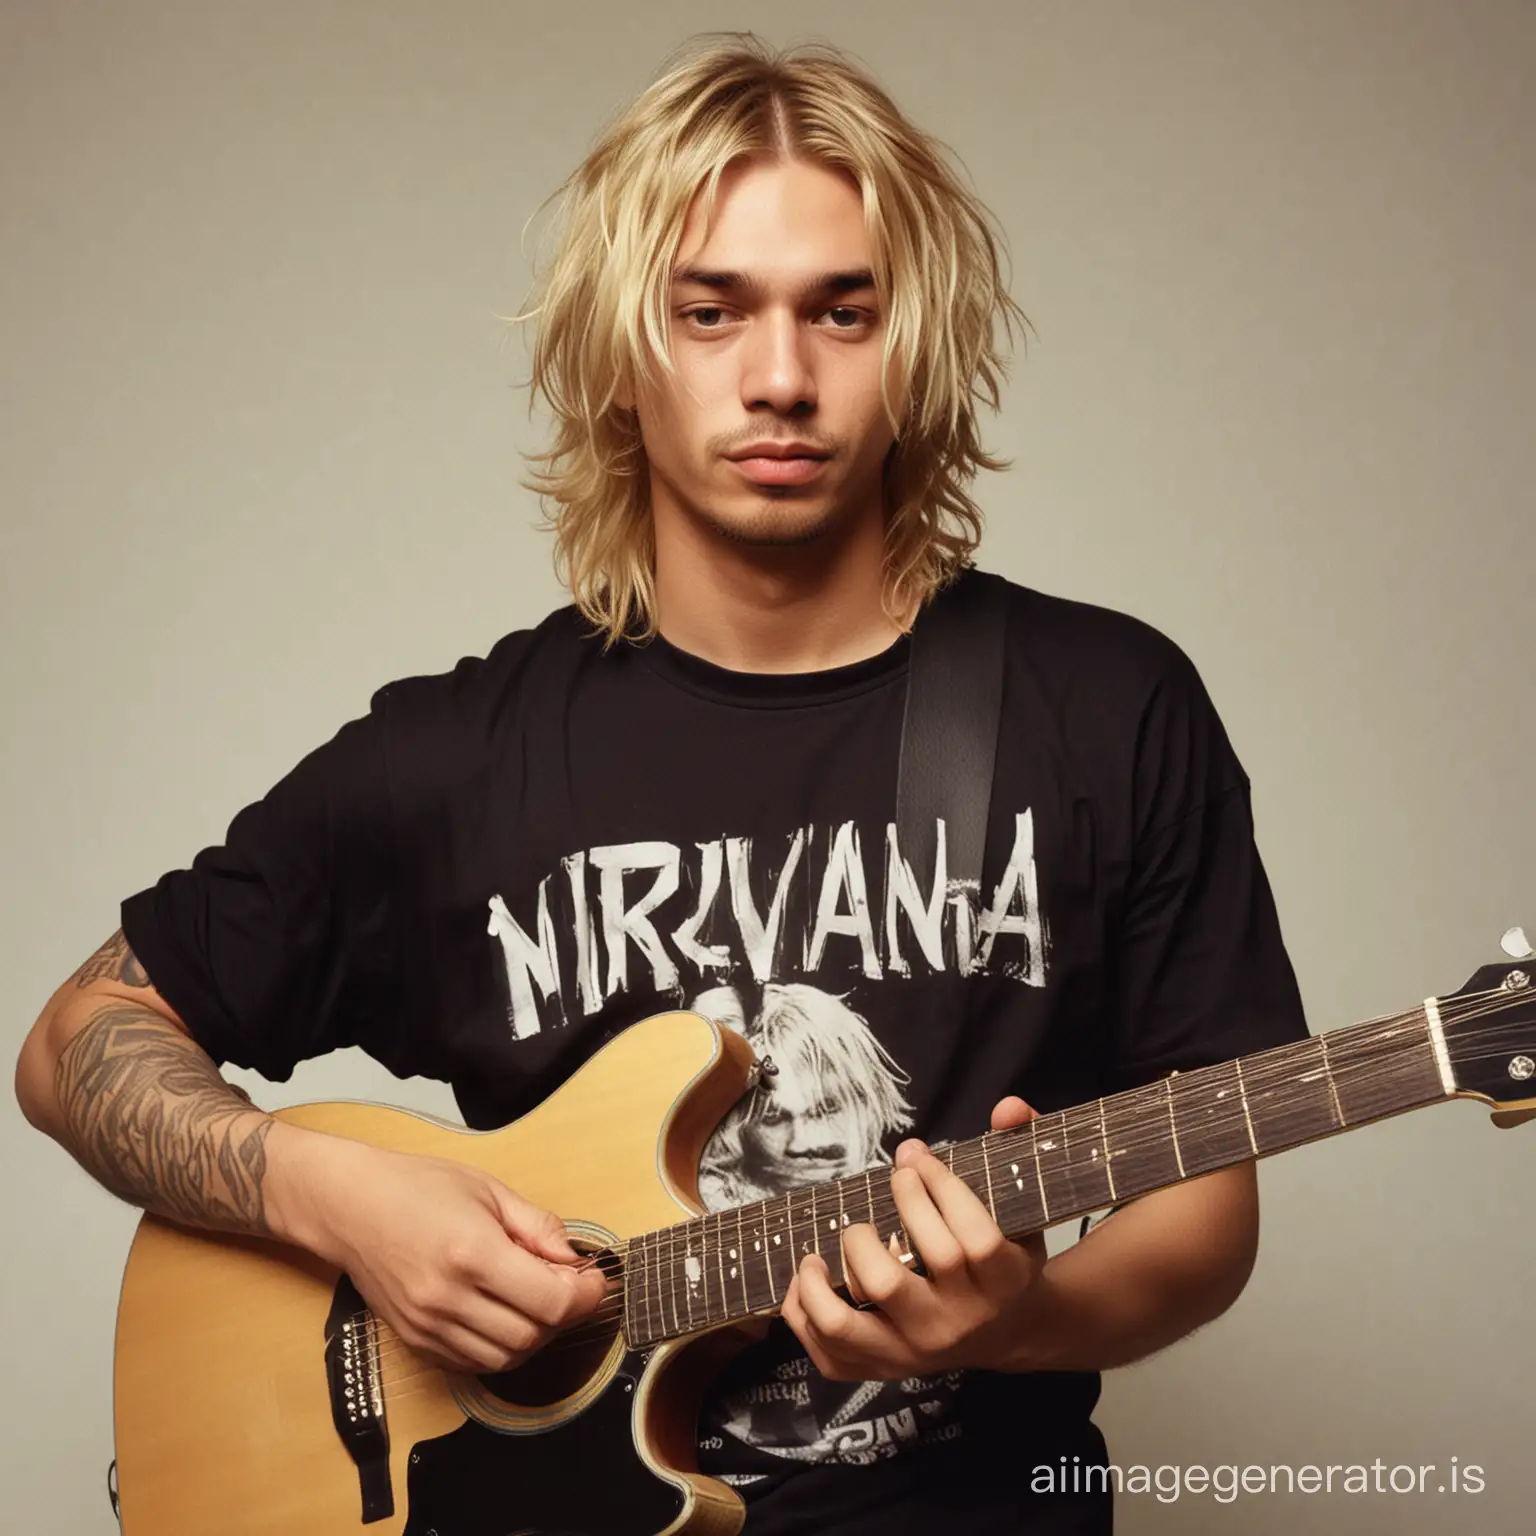 Make a photo of 2 people,A 25 year old Indonesian man Short haired wearing a black t-shirt that says "NIRVANA", was playing acoustic guitar with a 30 year old American man , his face looks very similar to Kurt Cobain Shoulder length curly blonde hair, wearing a long-sleeved shirt with a t-shirt underneath,